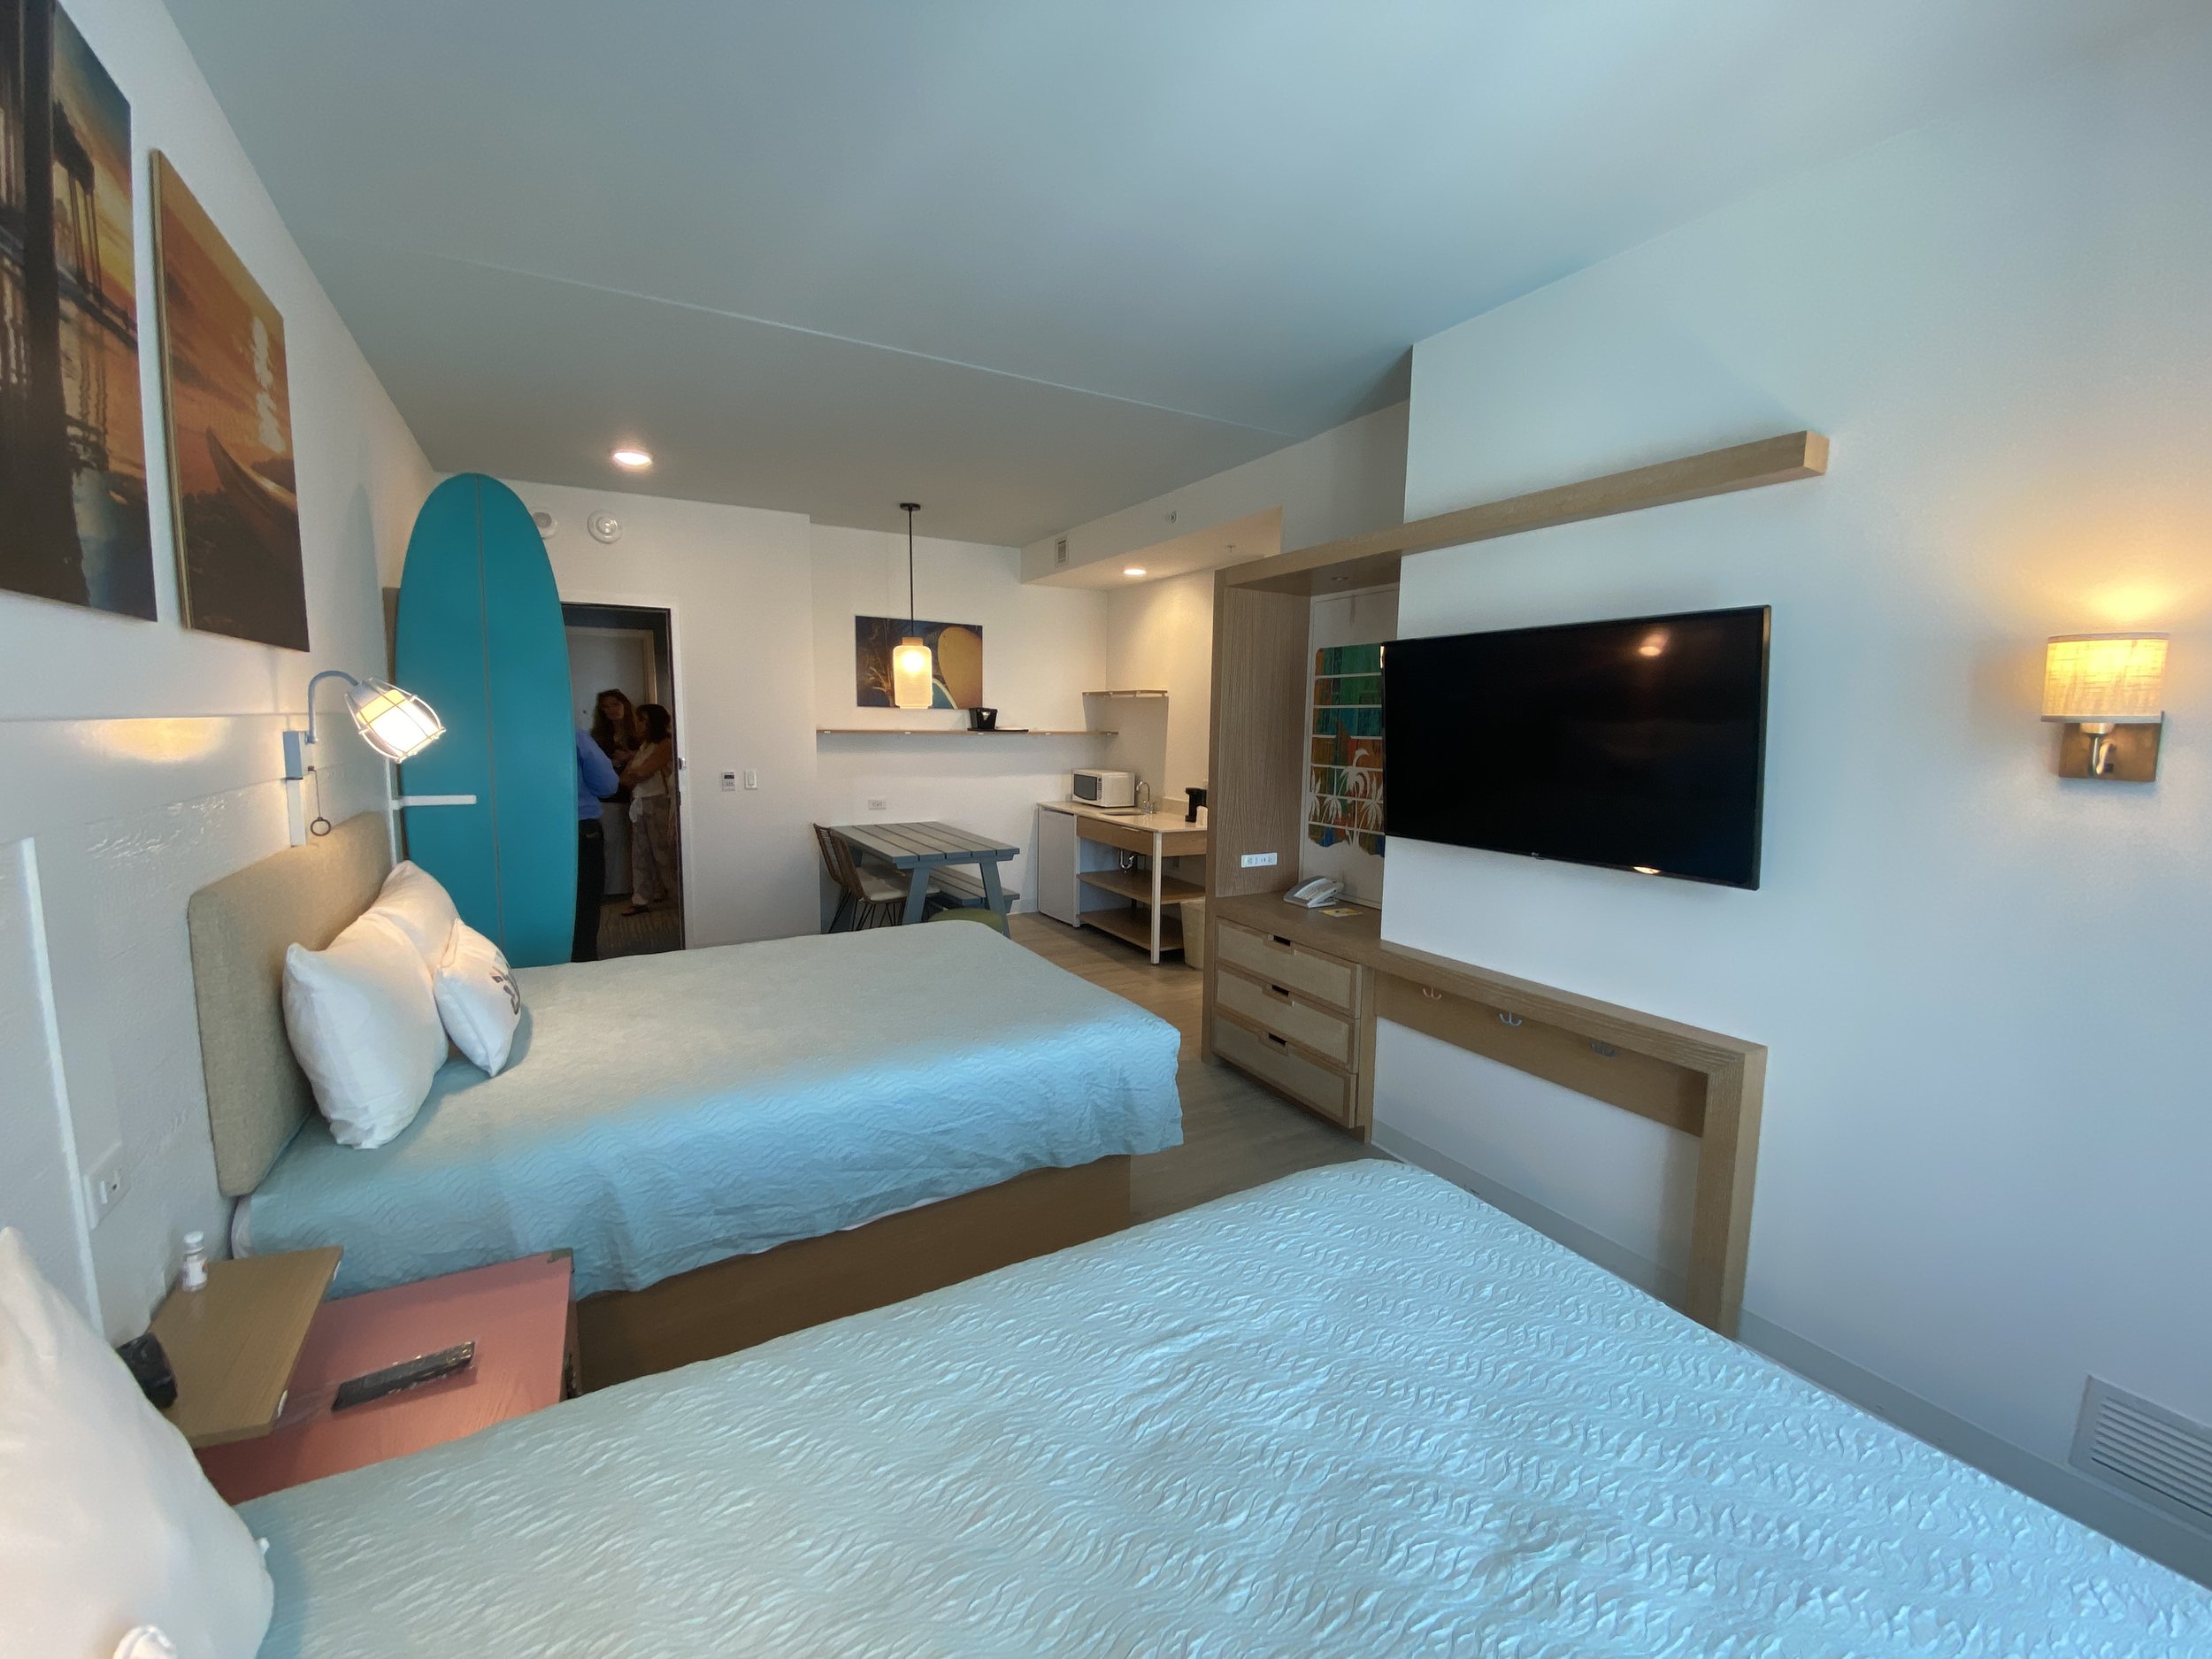  Two bedroom suites have an open area with 2 queen beds, a kitchenette, a dining area plus 1 separate bedroom. 